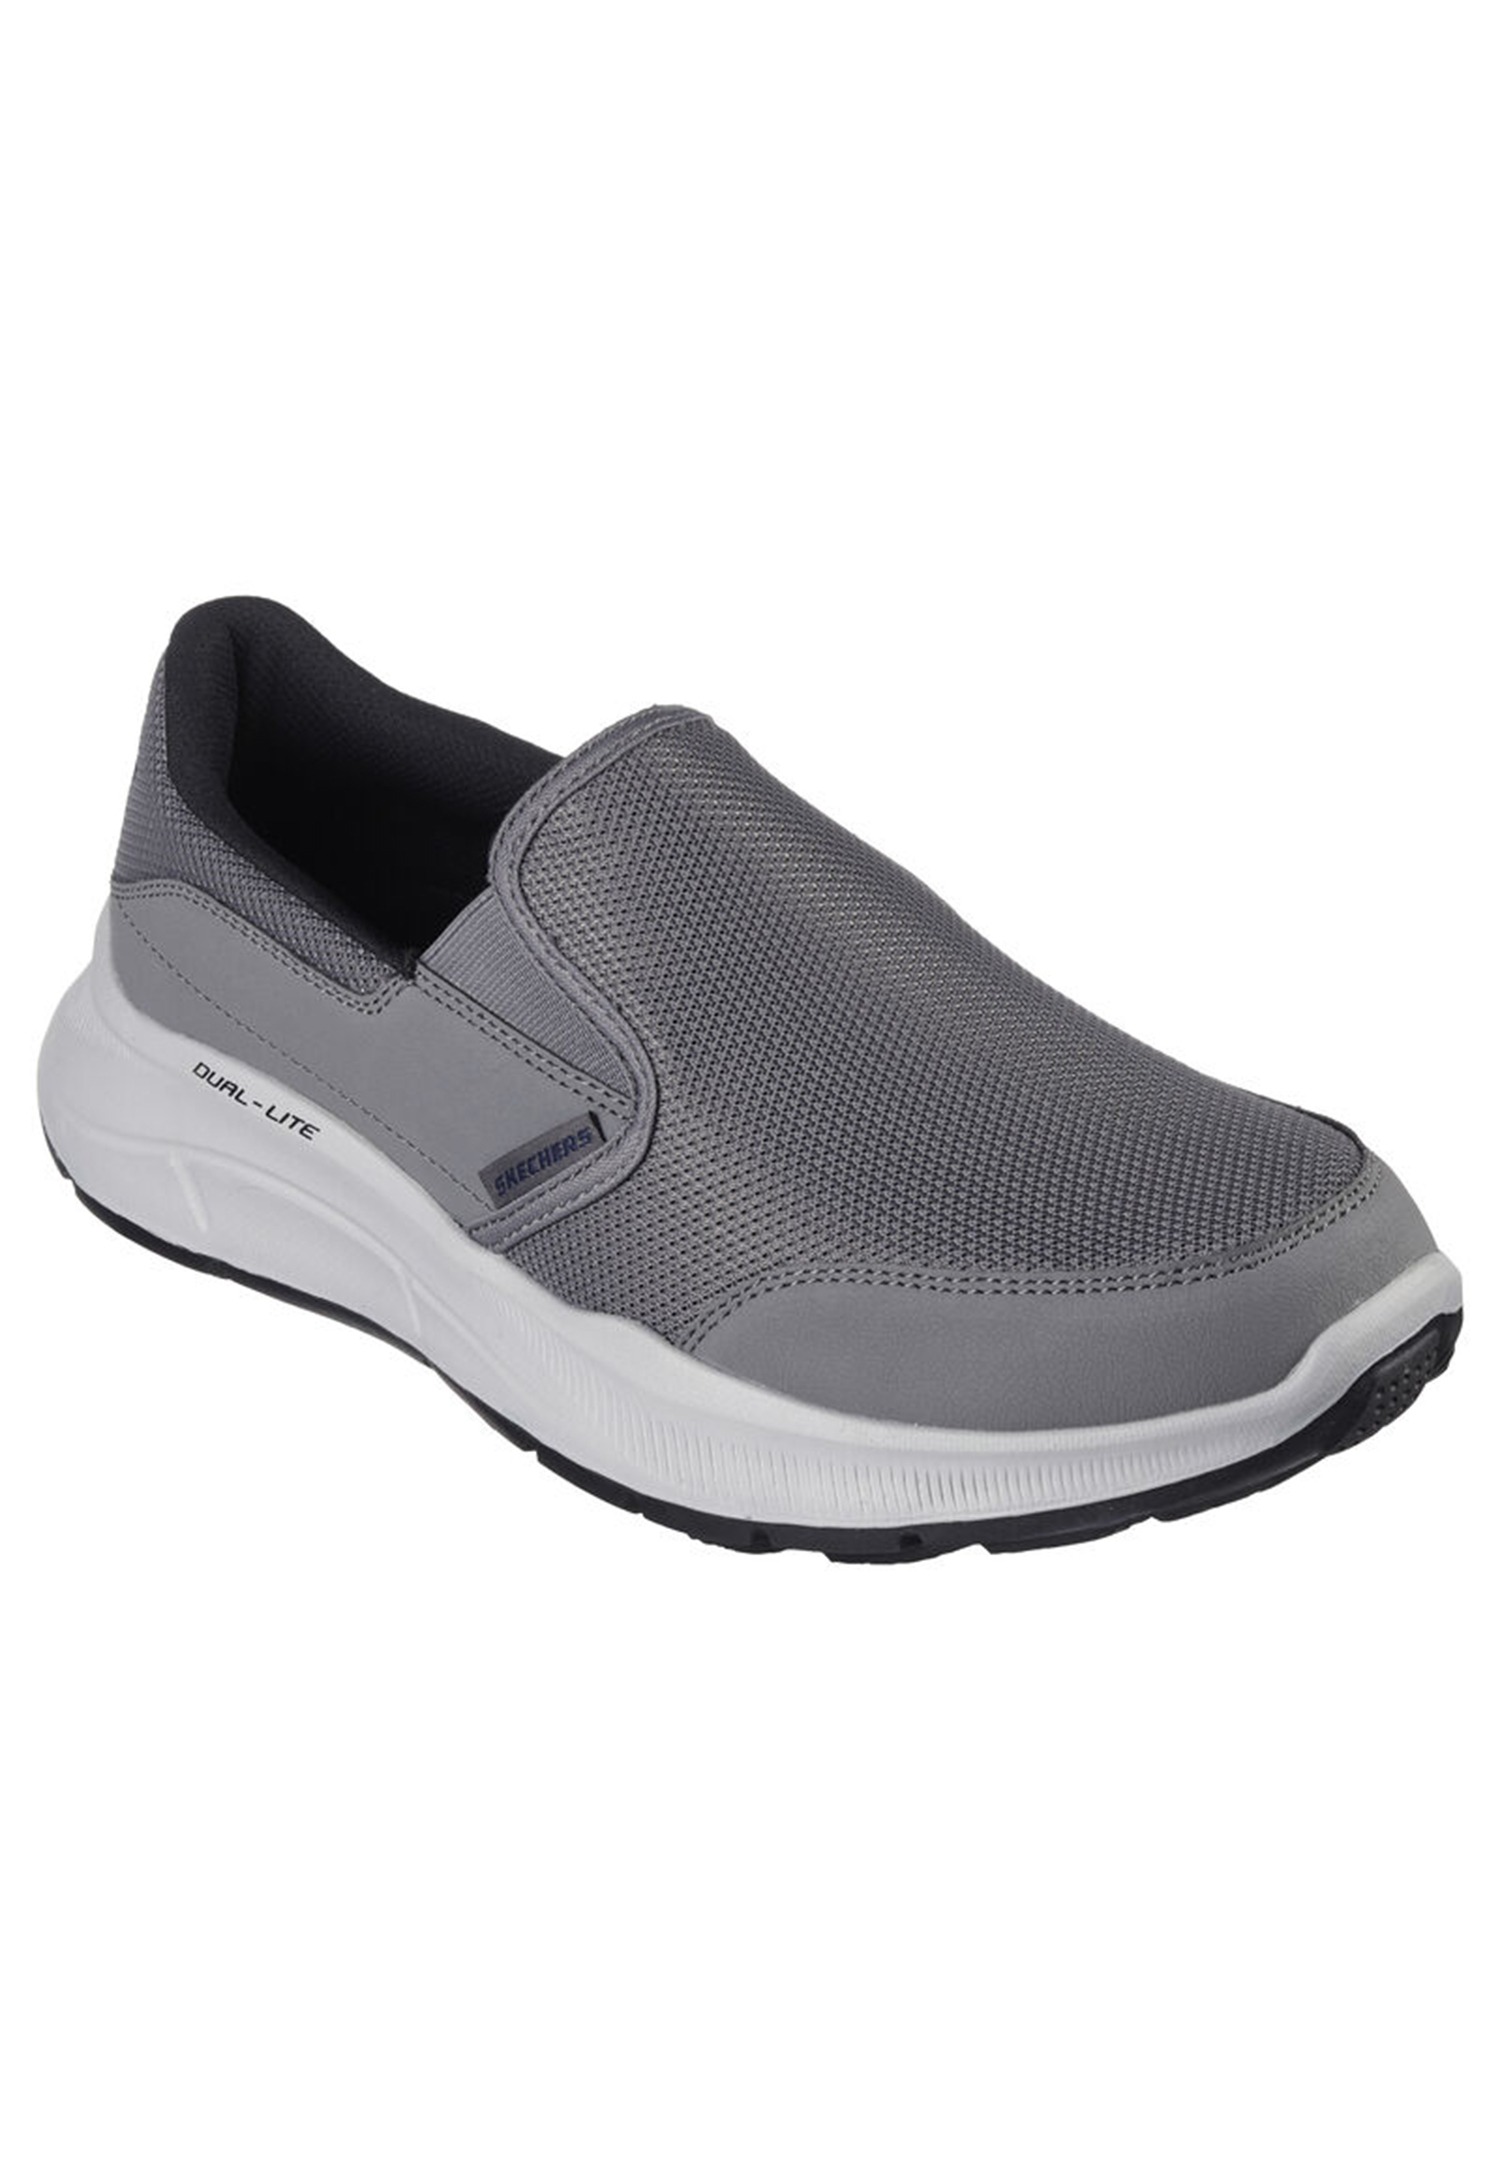 Skechers Herren Relaxed Fit Equalizer 5.0 PERSISTABLE Schuhe 232515 grau